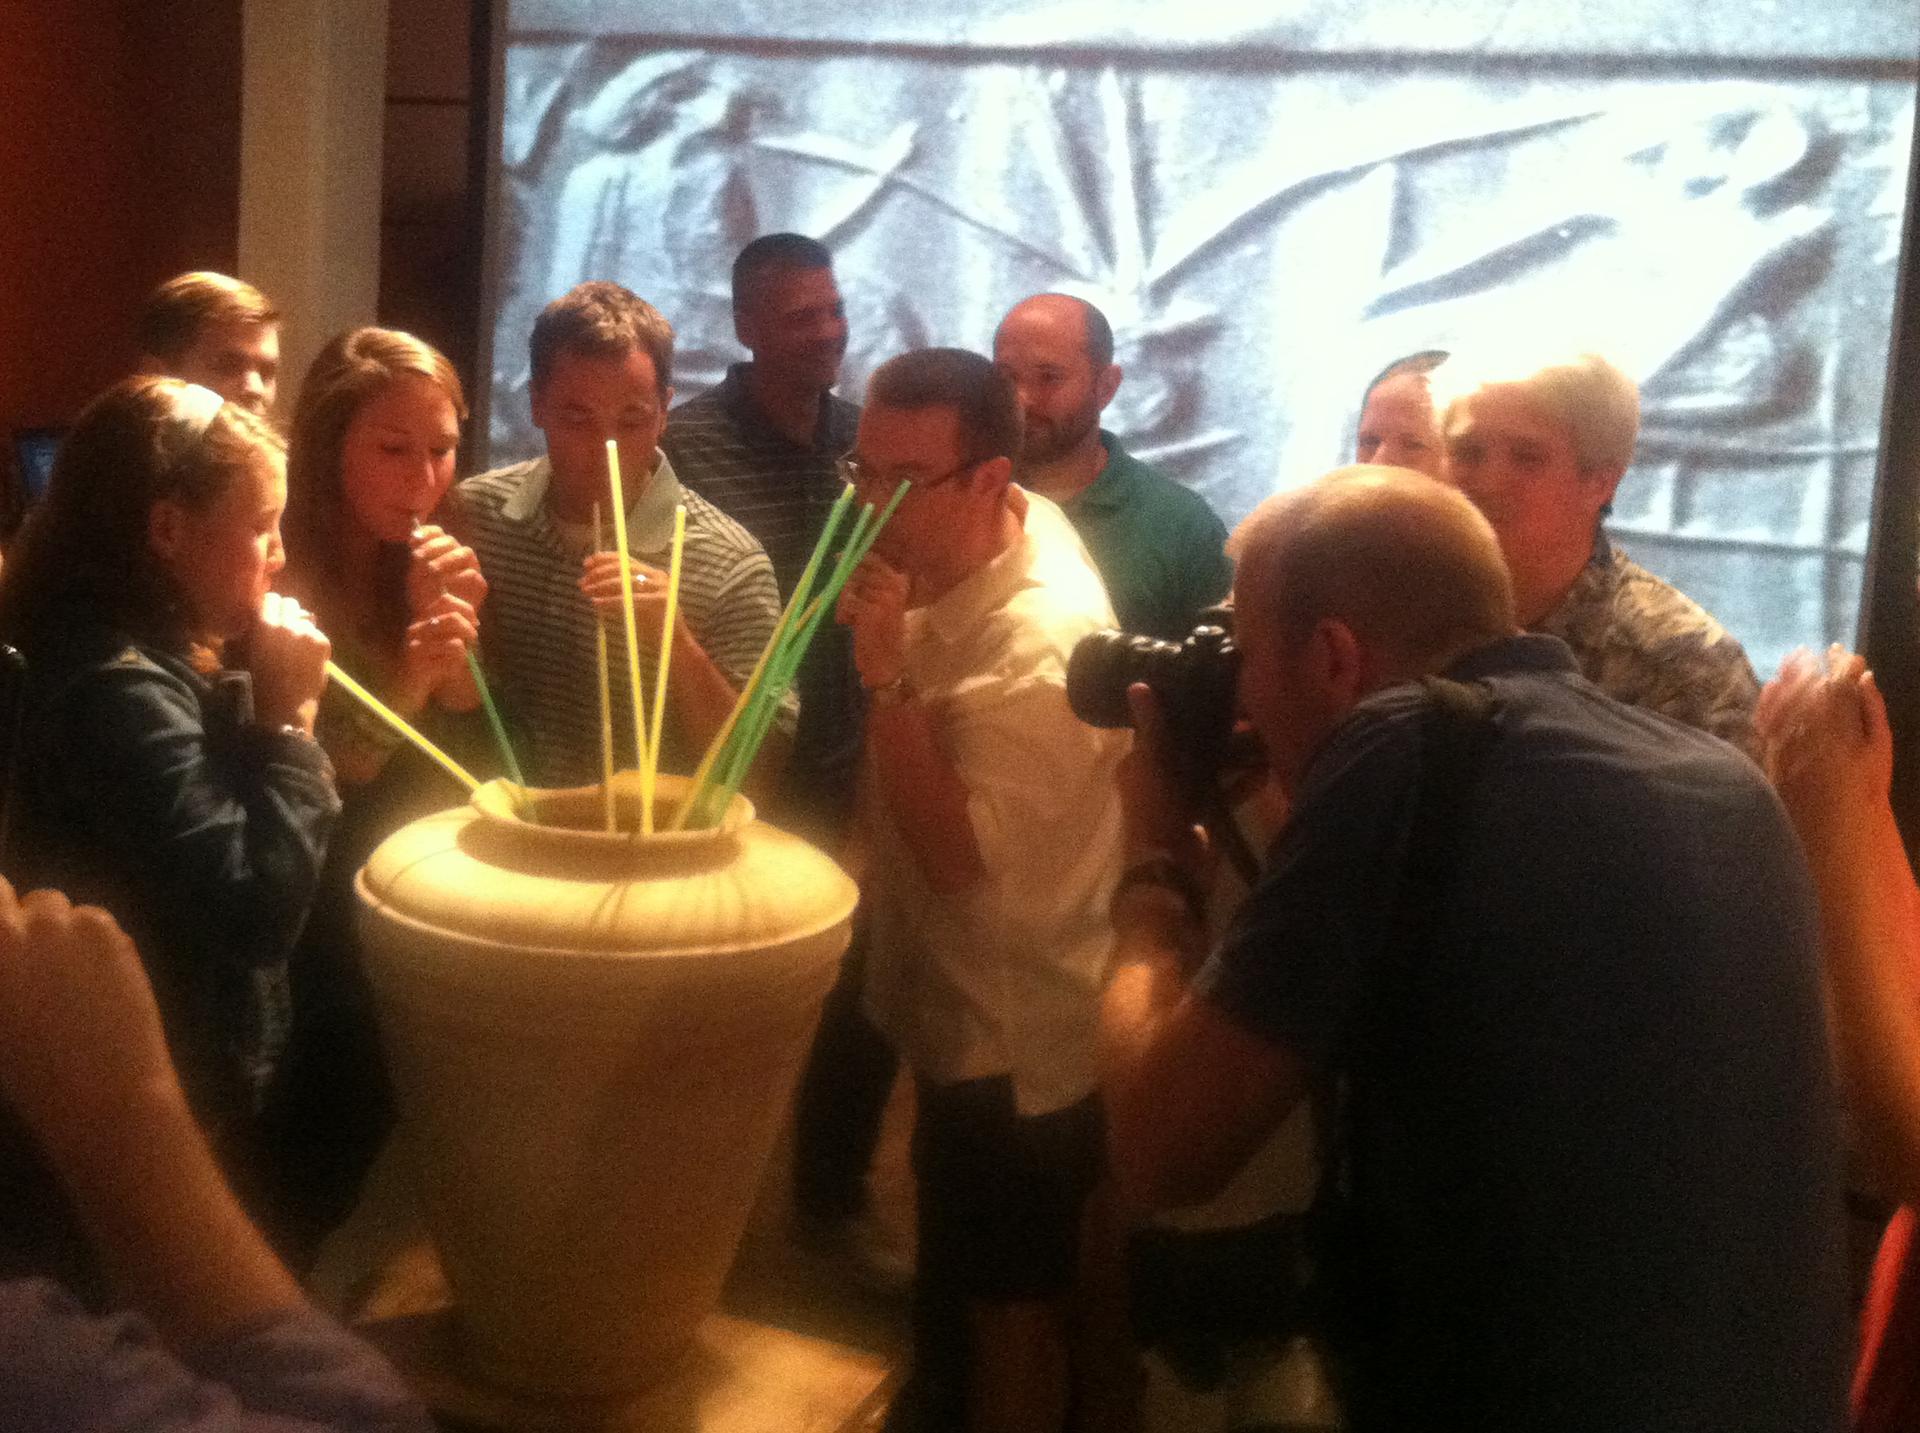 A group of people drink beer with straws out of a large vase.